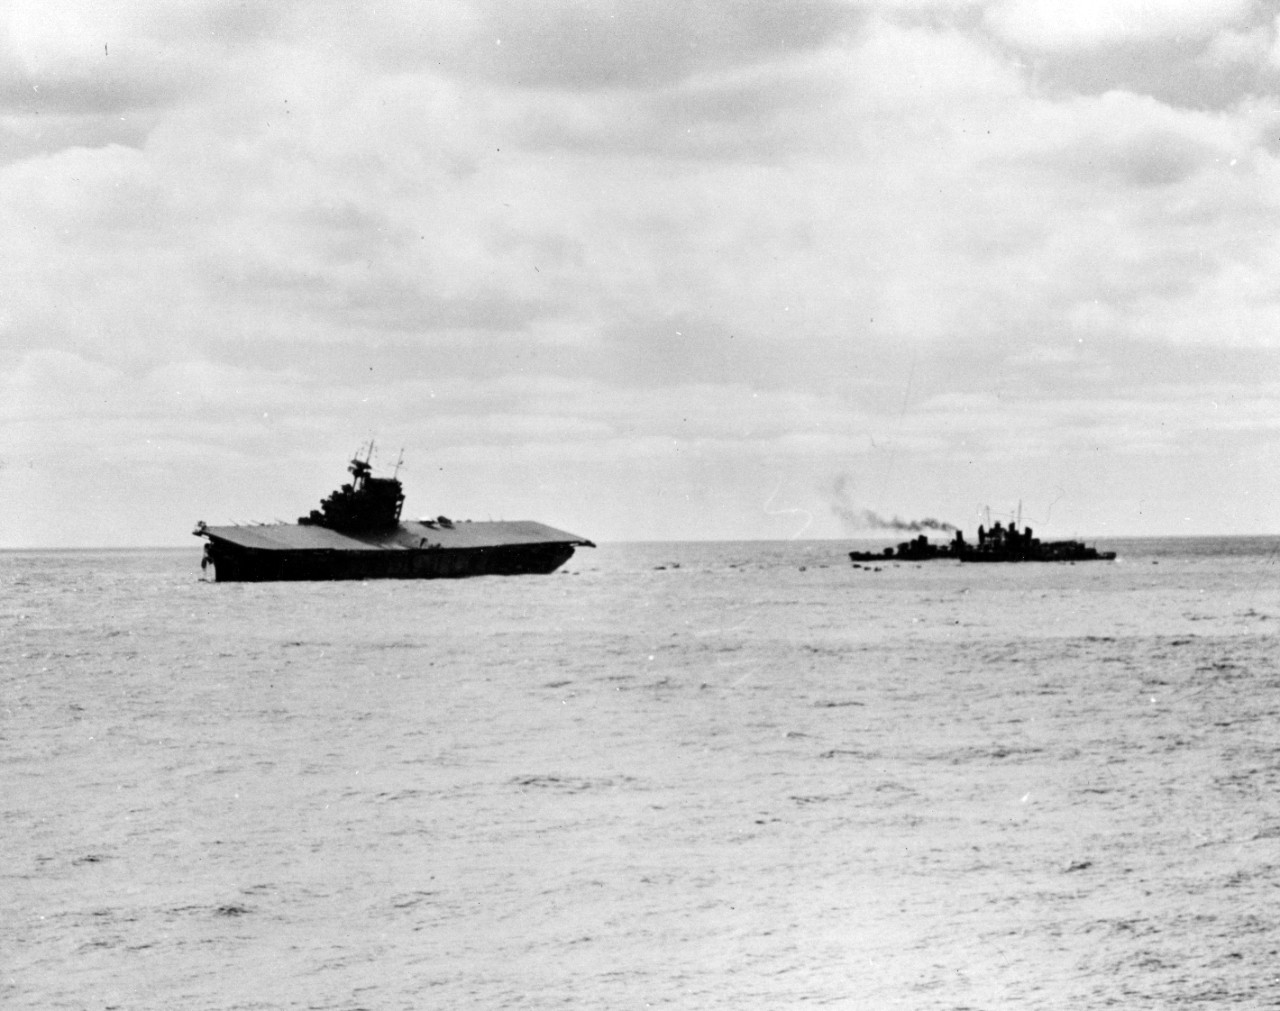 Photo #: 80-G-22231  Battle of Midway, June 1942